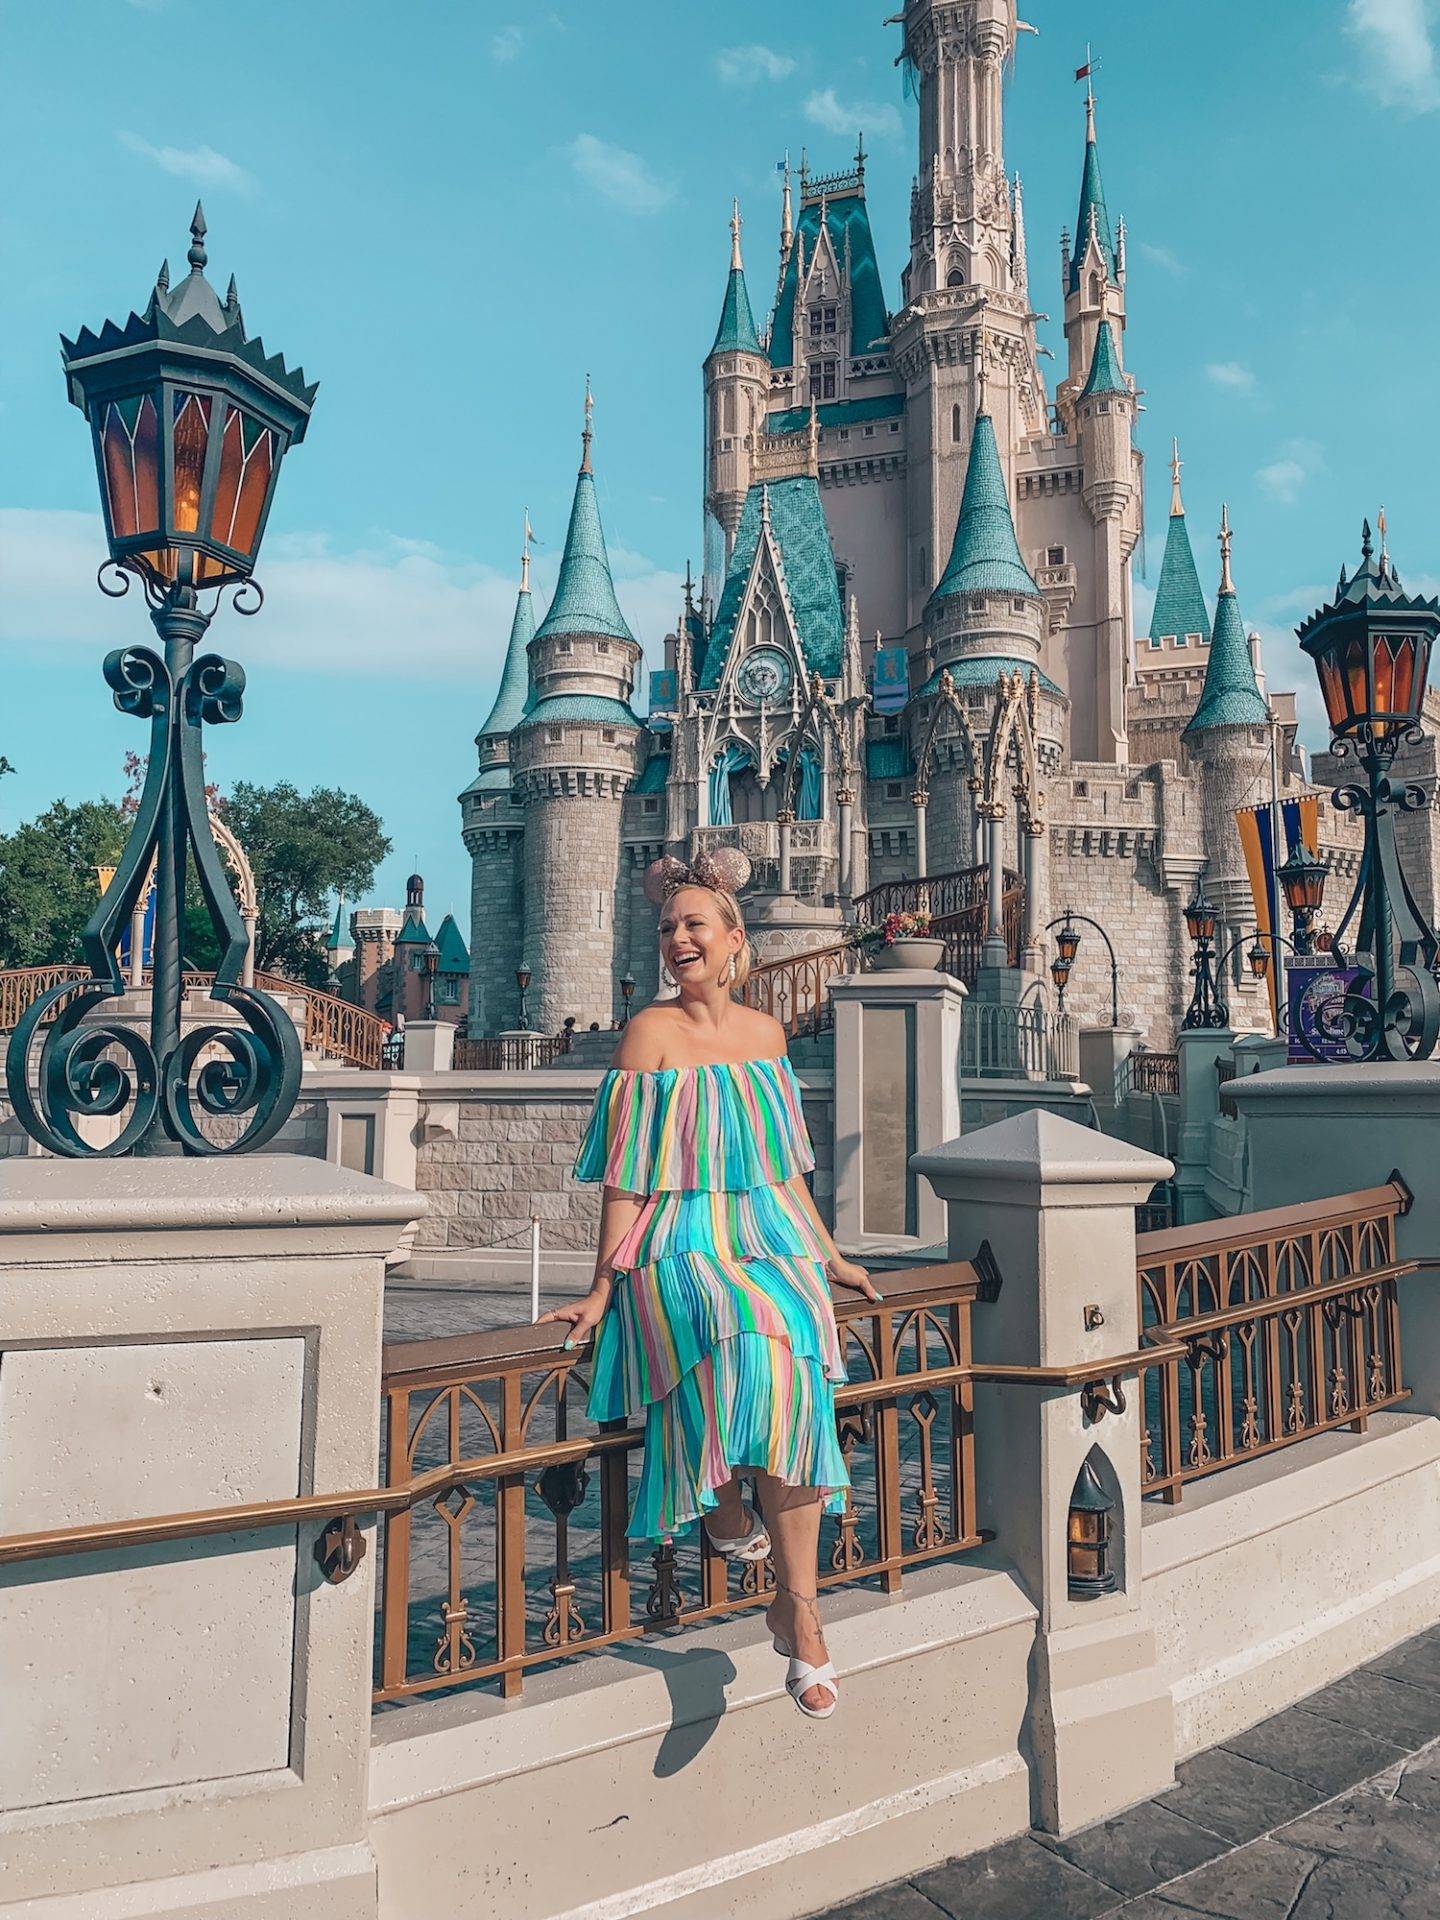 My all time favourite spot in Disney World is Cinderella's Castle. Click the photo for a complete guide on how to get the perfect photo at Disney! Includes a list of all the top Disney World photo spots. via www.kirstenwendlandt.com